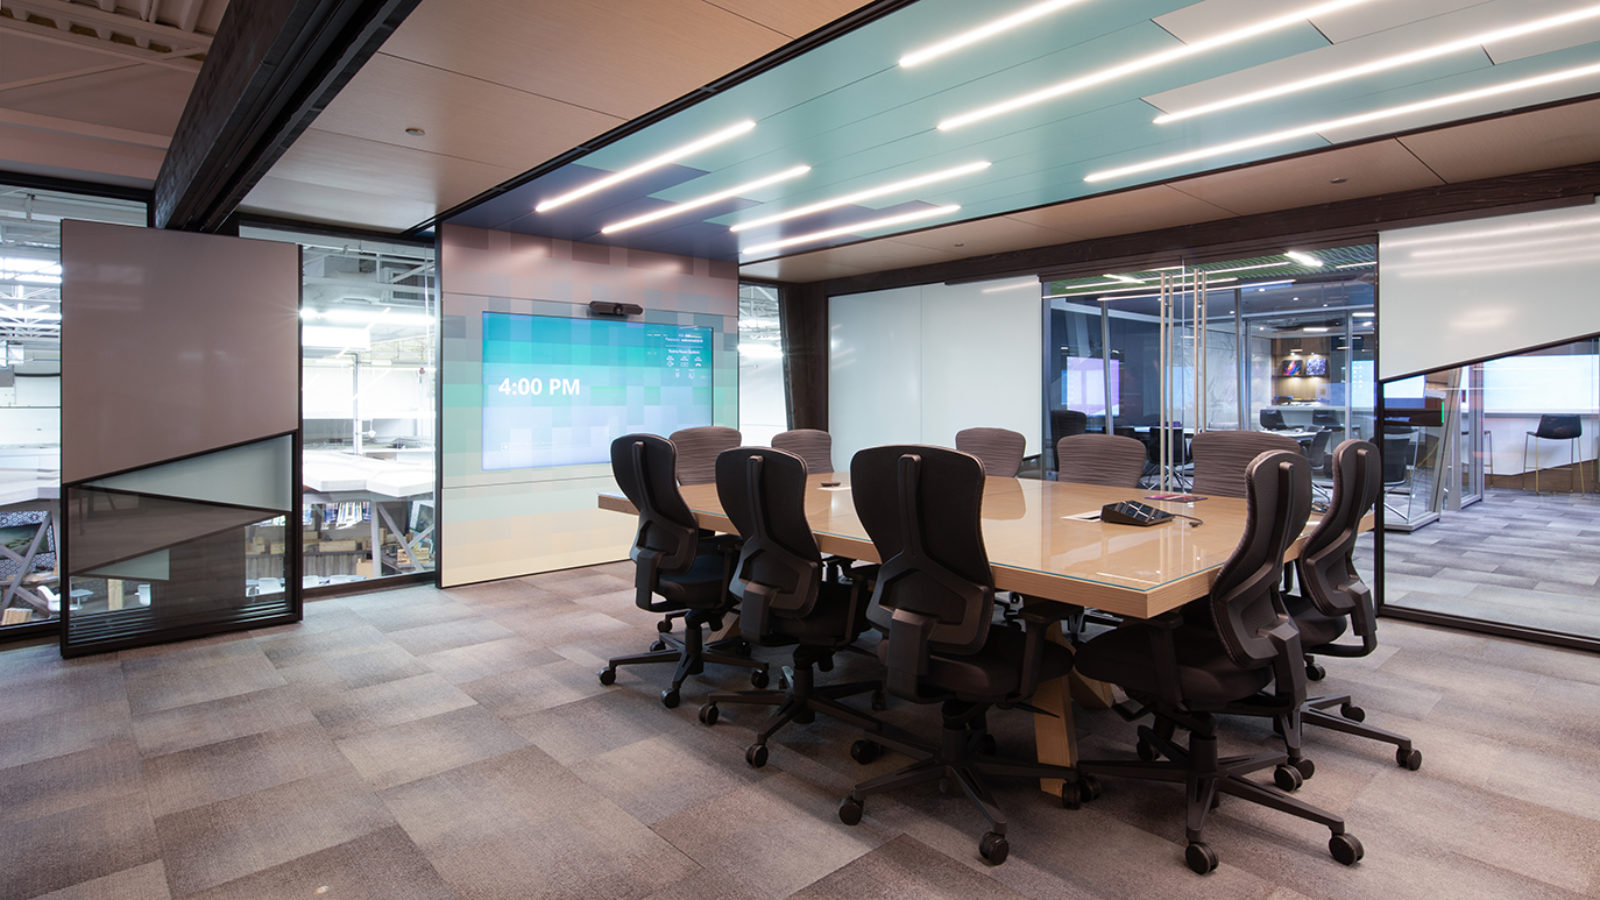 Conference room with DIRTT solution, integrated screens, lighting, panels and doors